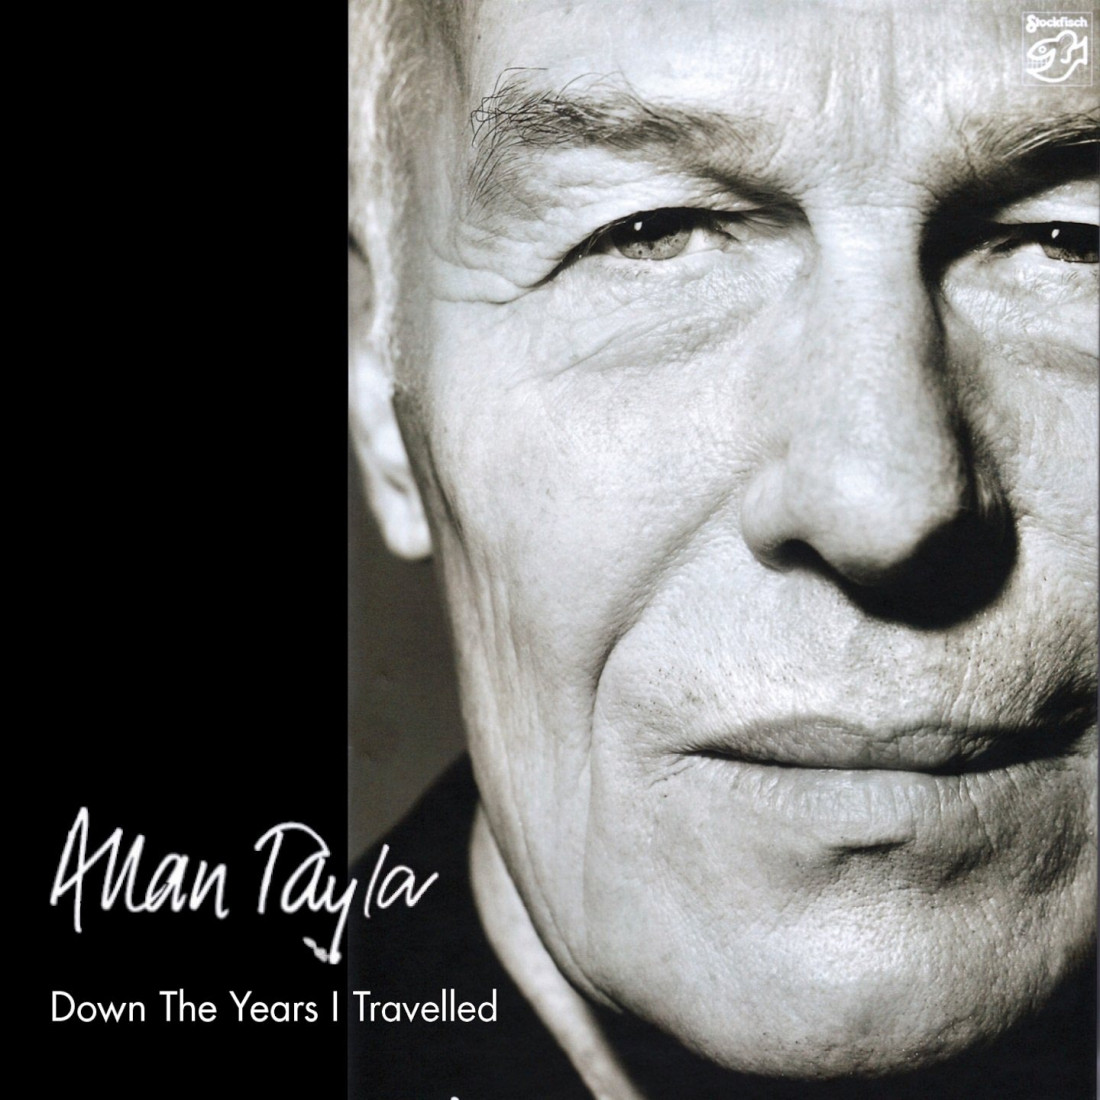 [Allan Taylor] Choose Your Time (Down The Years I travelled) Photo-Image